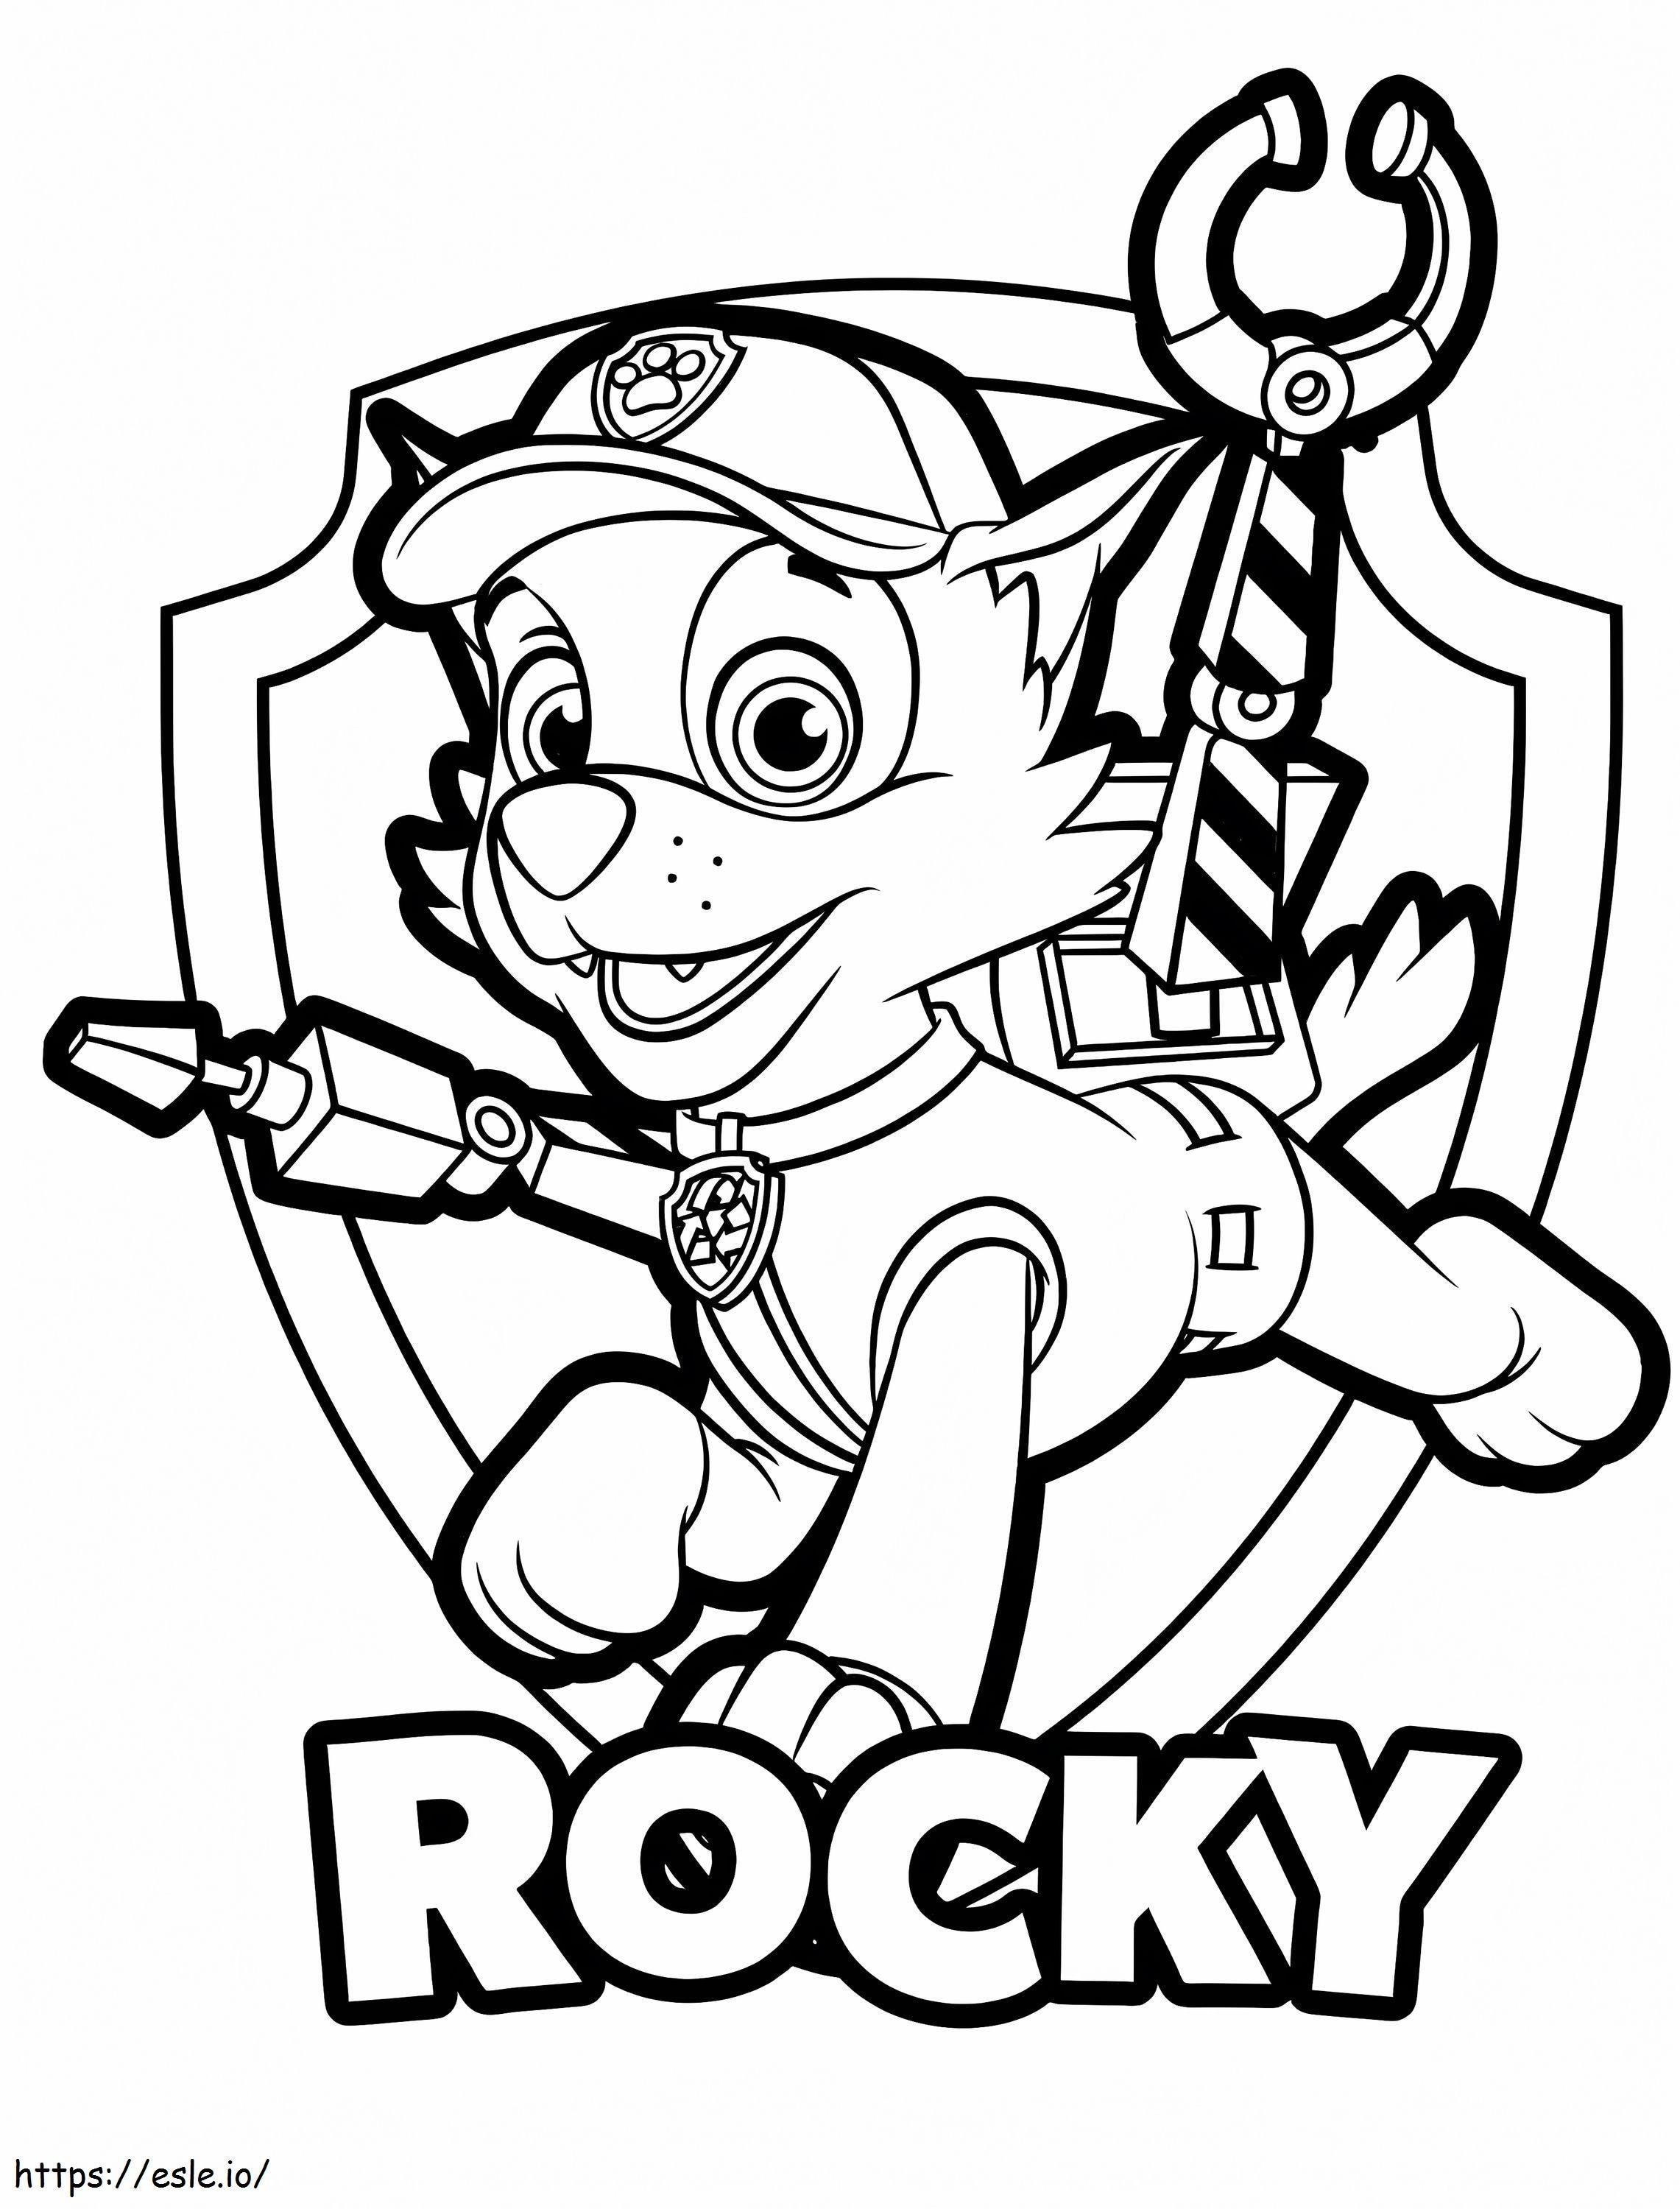 Rocky From Paw Patrol coloring page